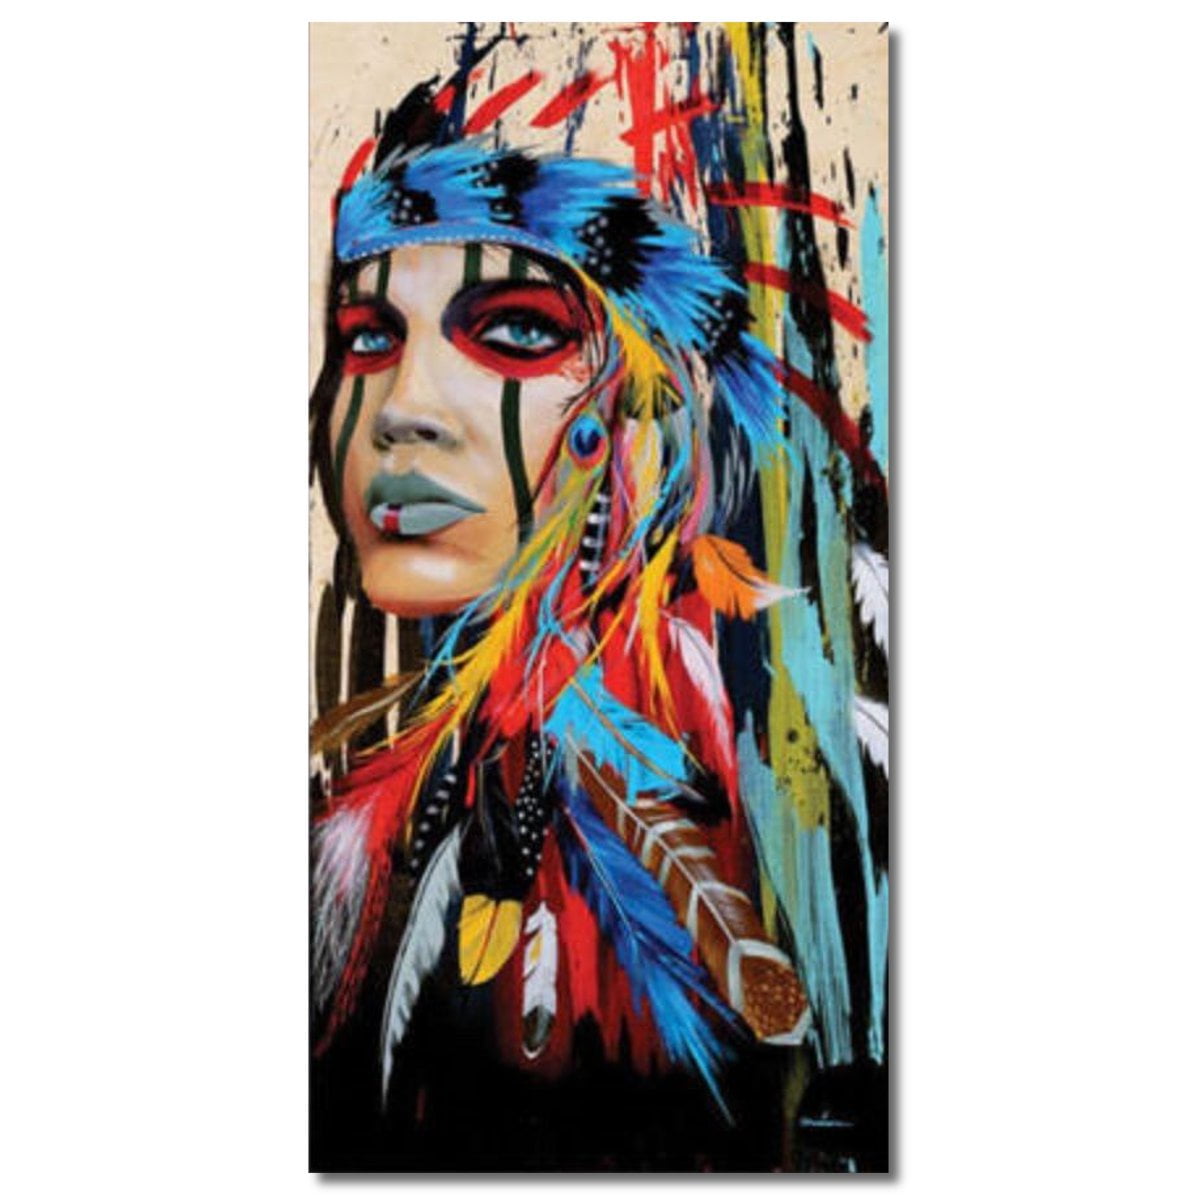 Abstract Indian Woman Canvas Oil Painting Print Picture Home Wall Hang Art Decor 